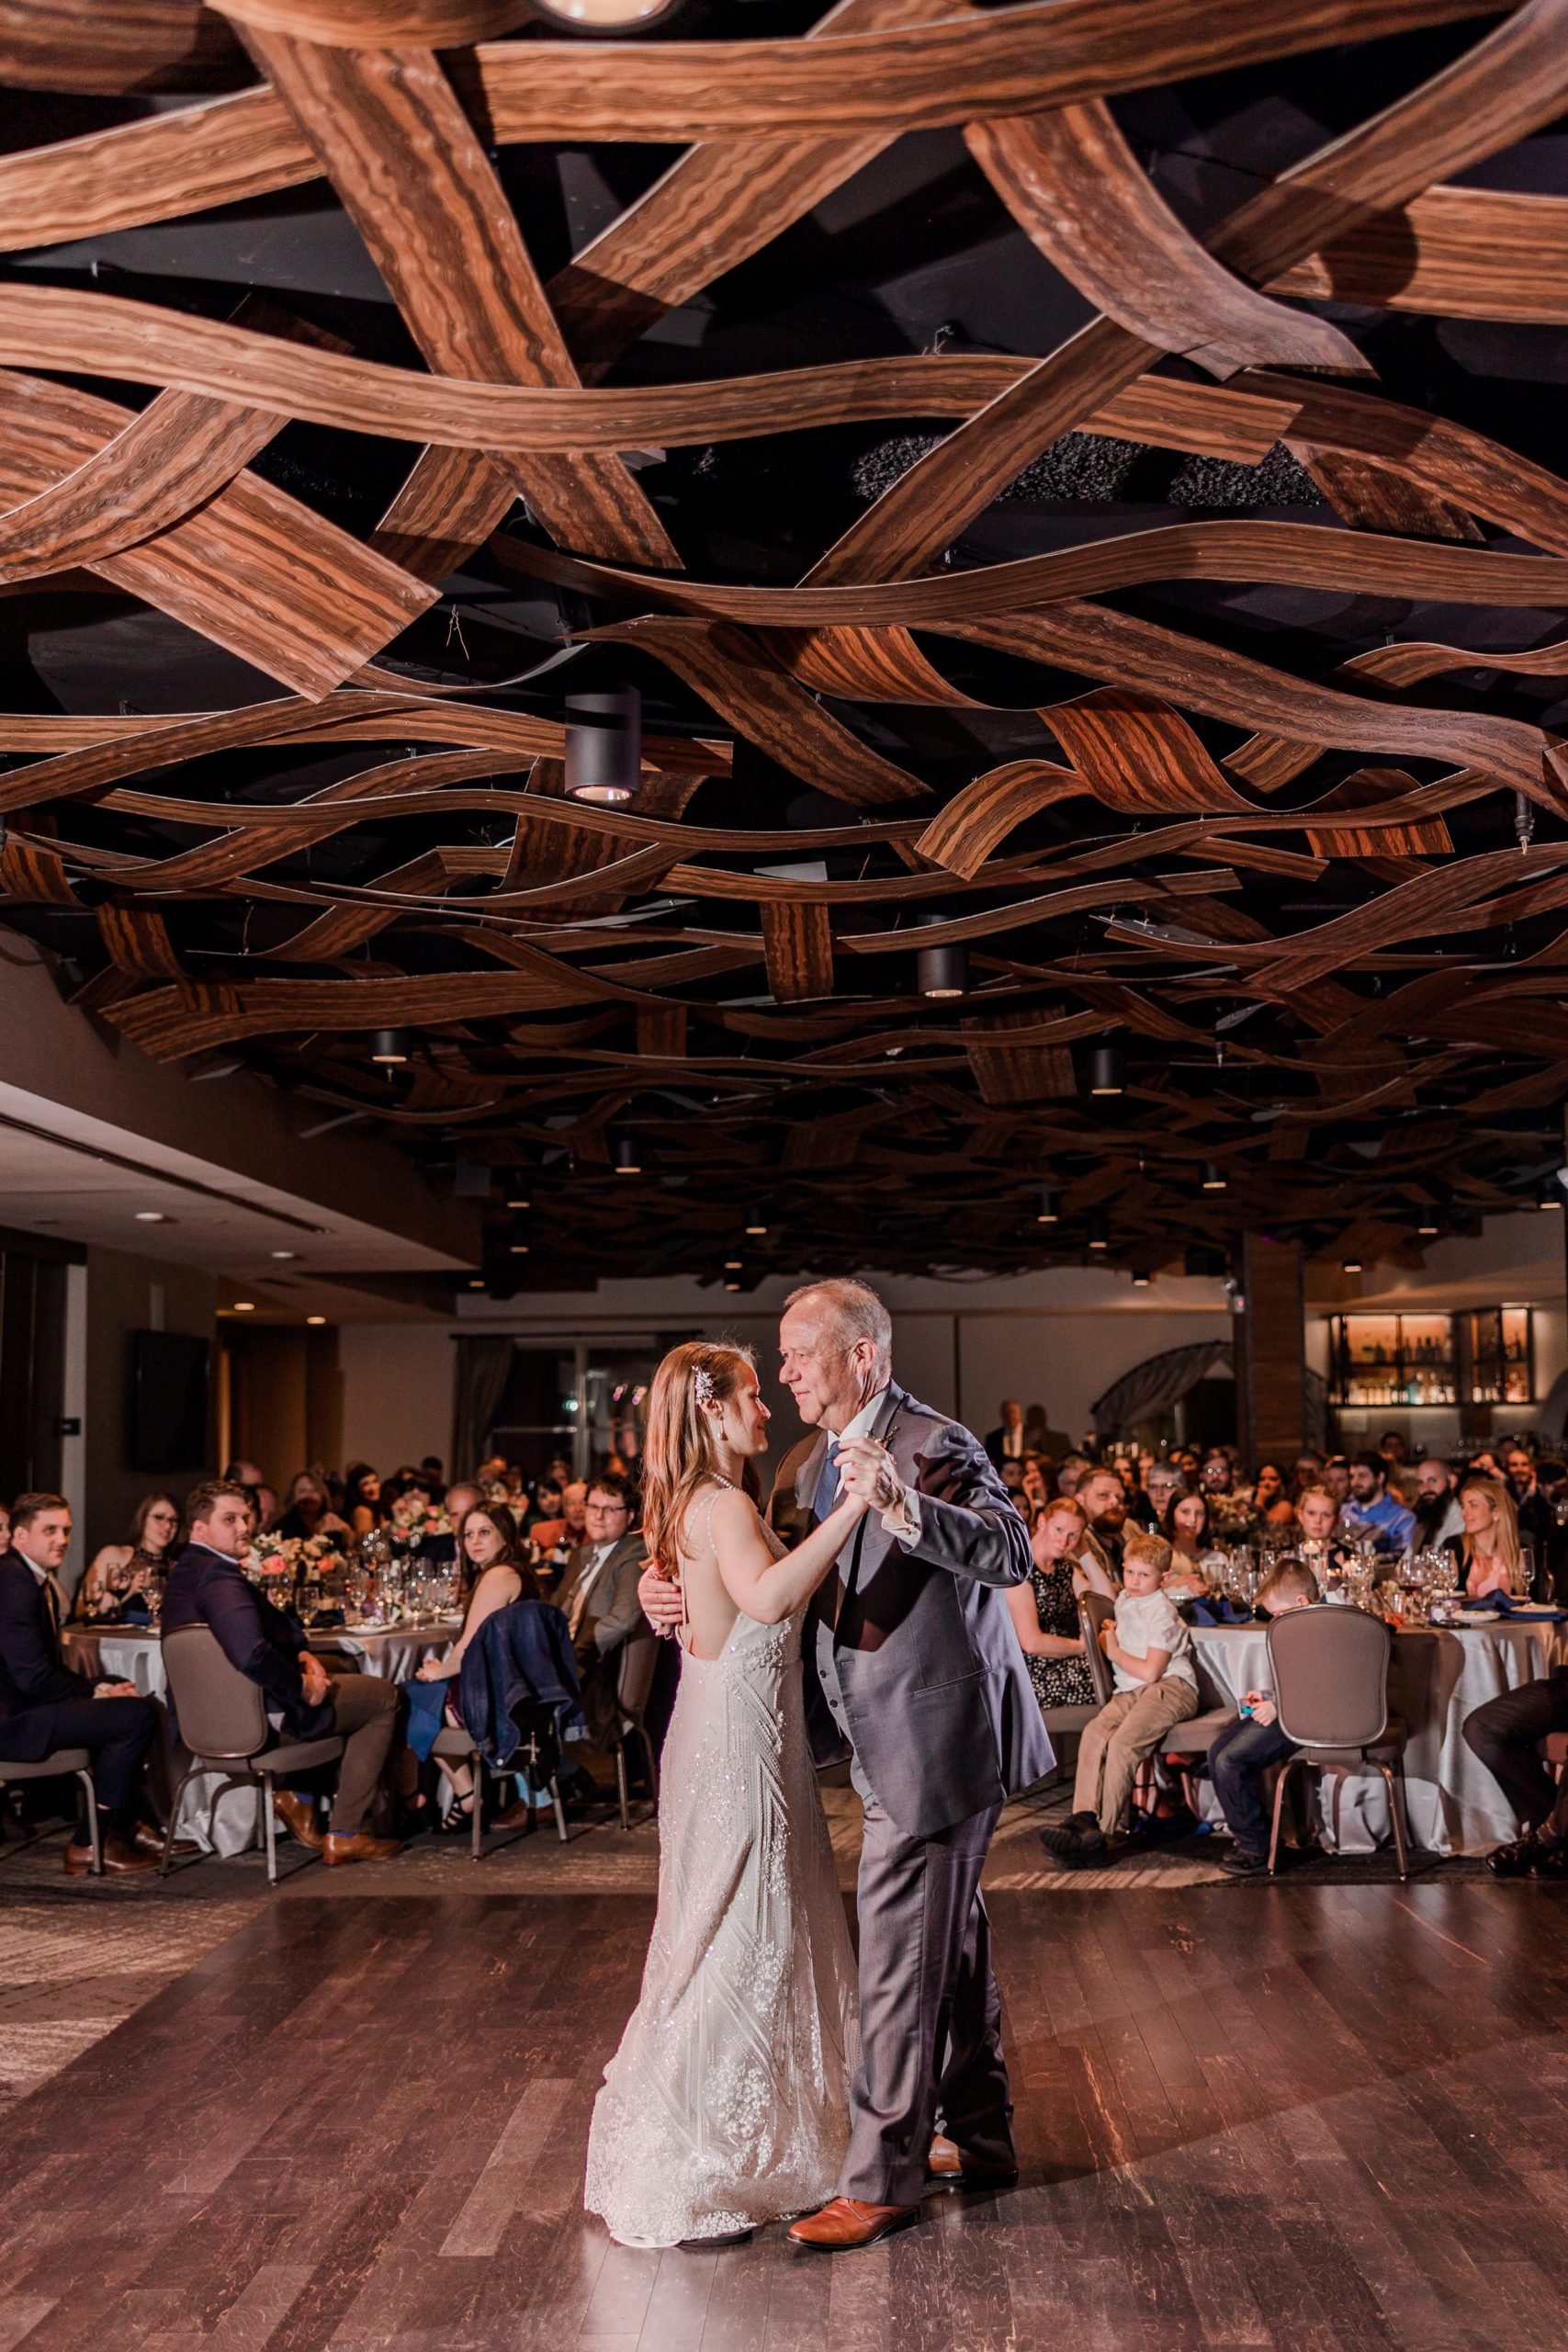 Bride dances with her father at a wedding in Naperville, Illinois. Photo Taken by Austin Wedding Photographers, Joanna & Brett Photography